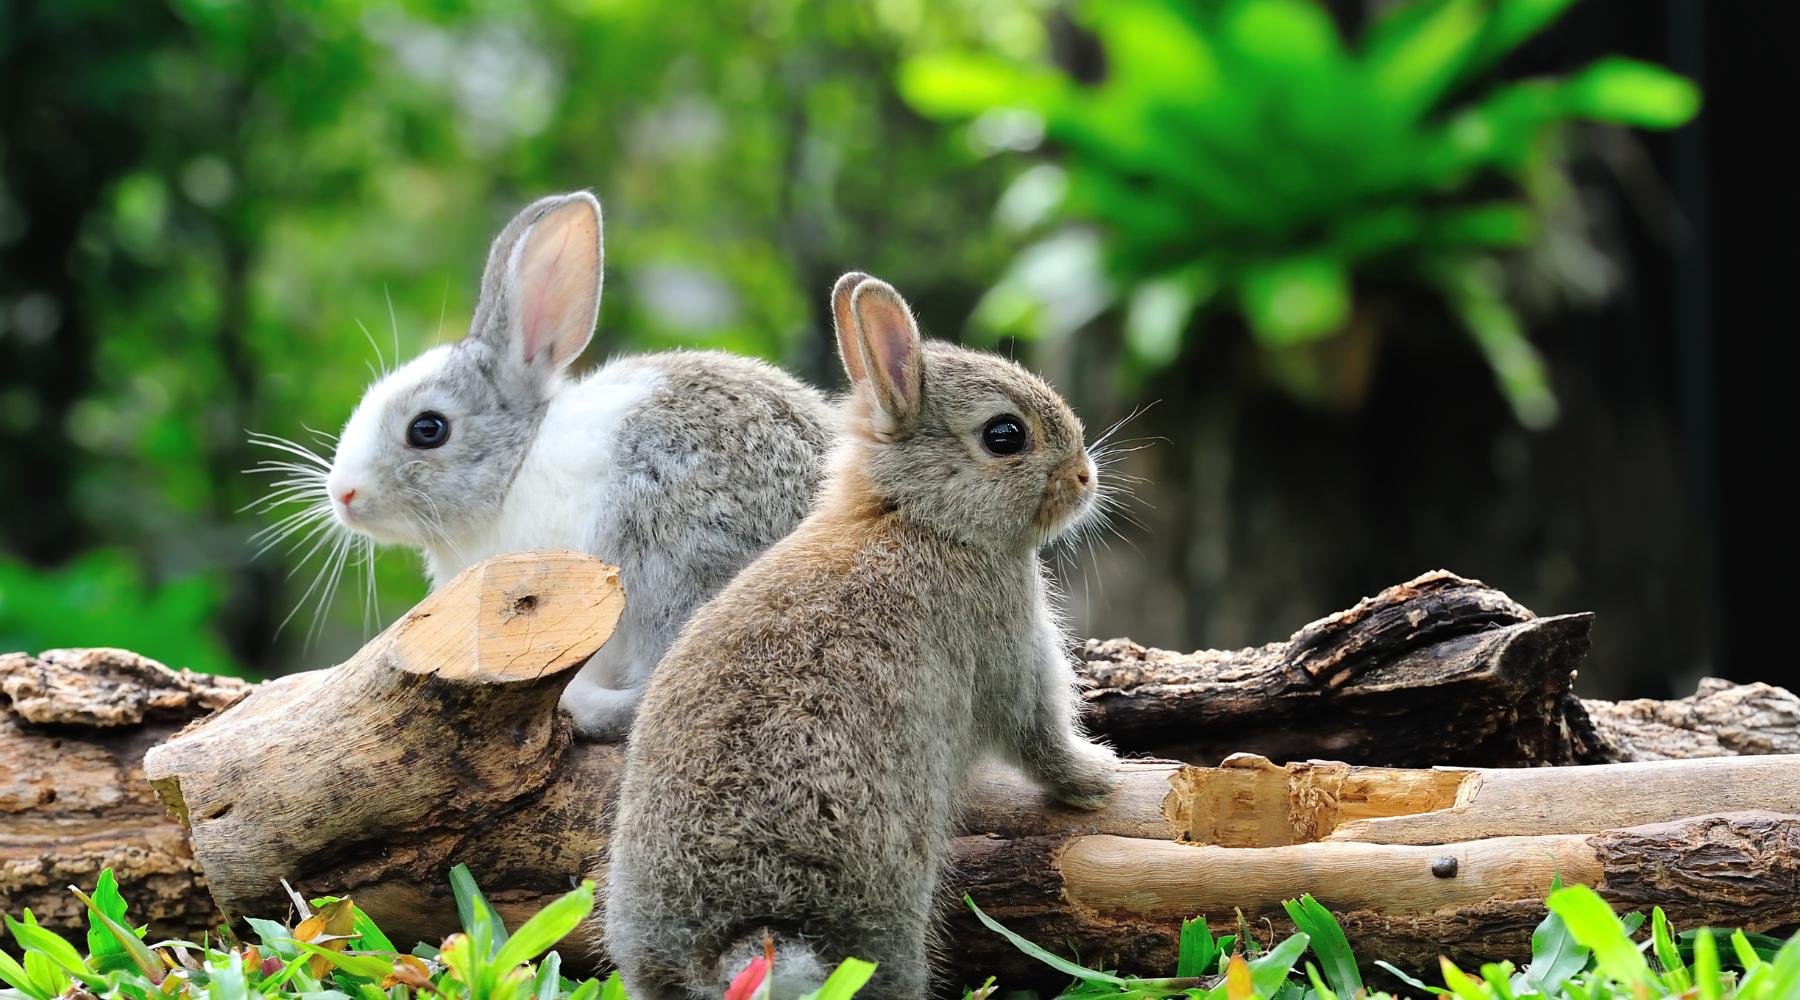 Fun Facts about Rabbits You Didn't Know